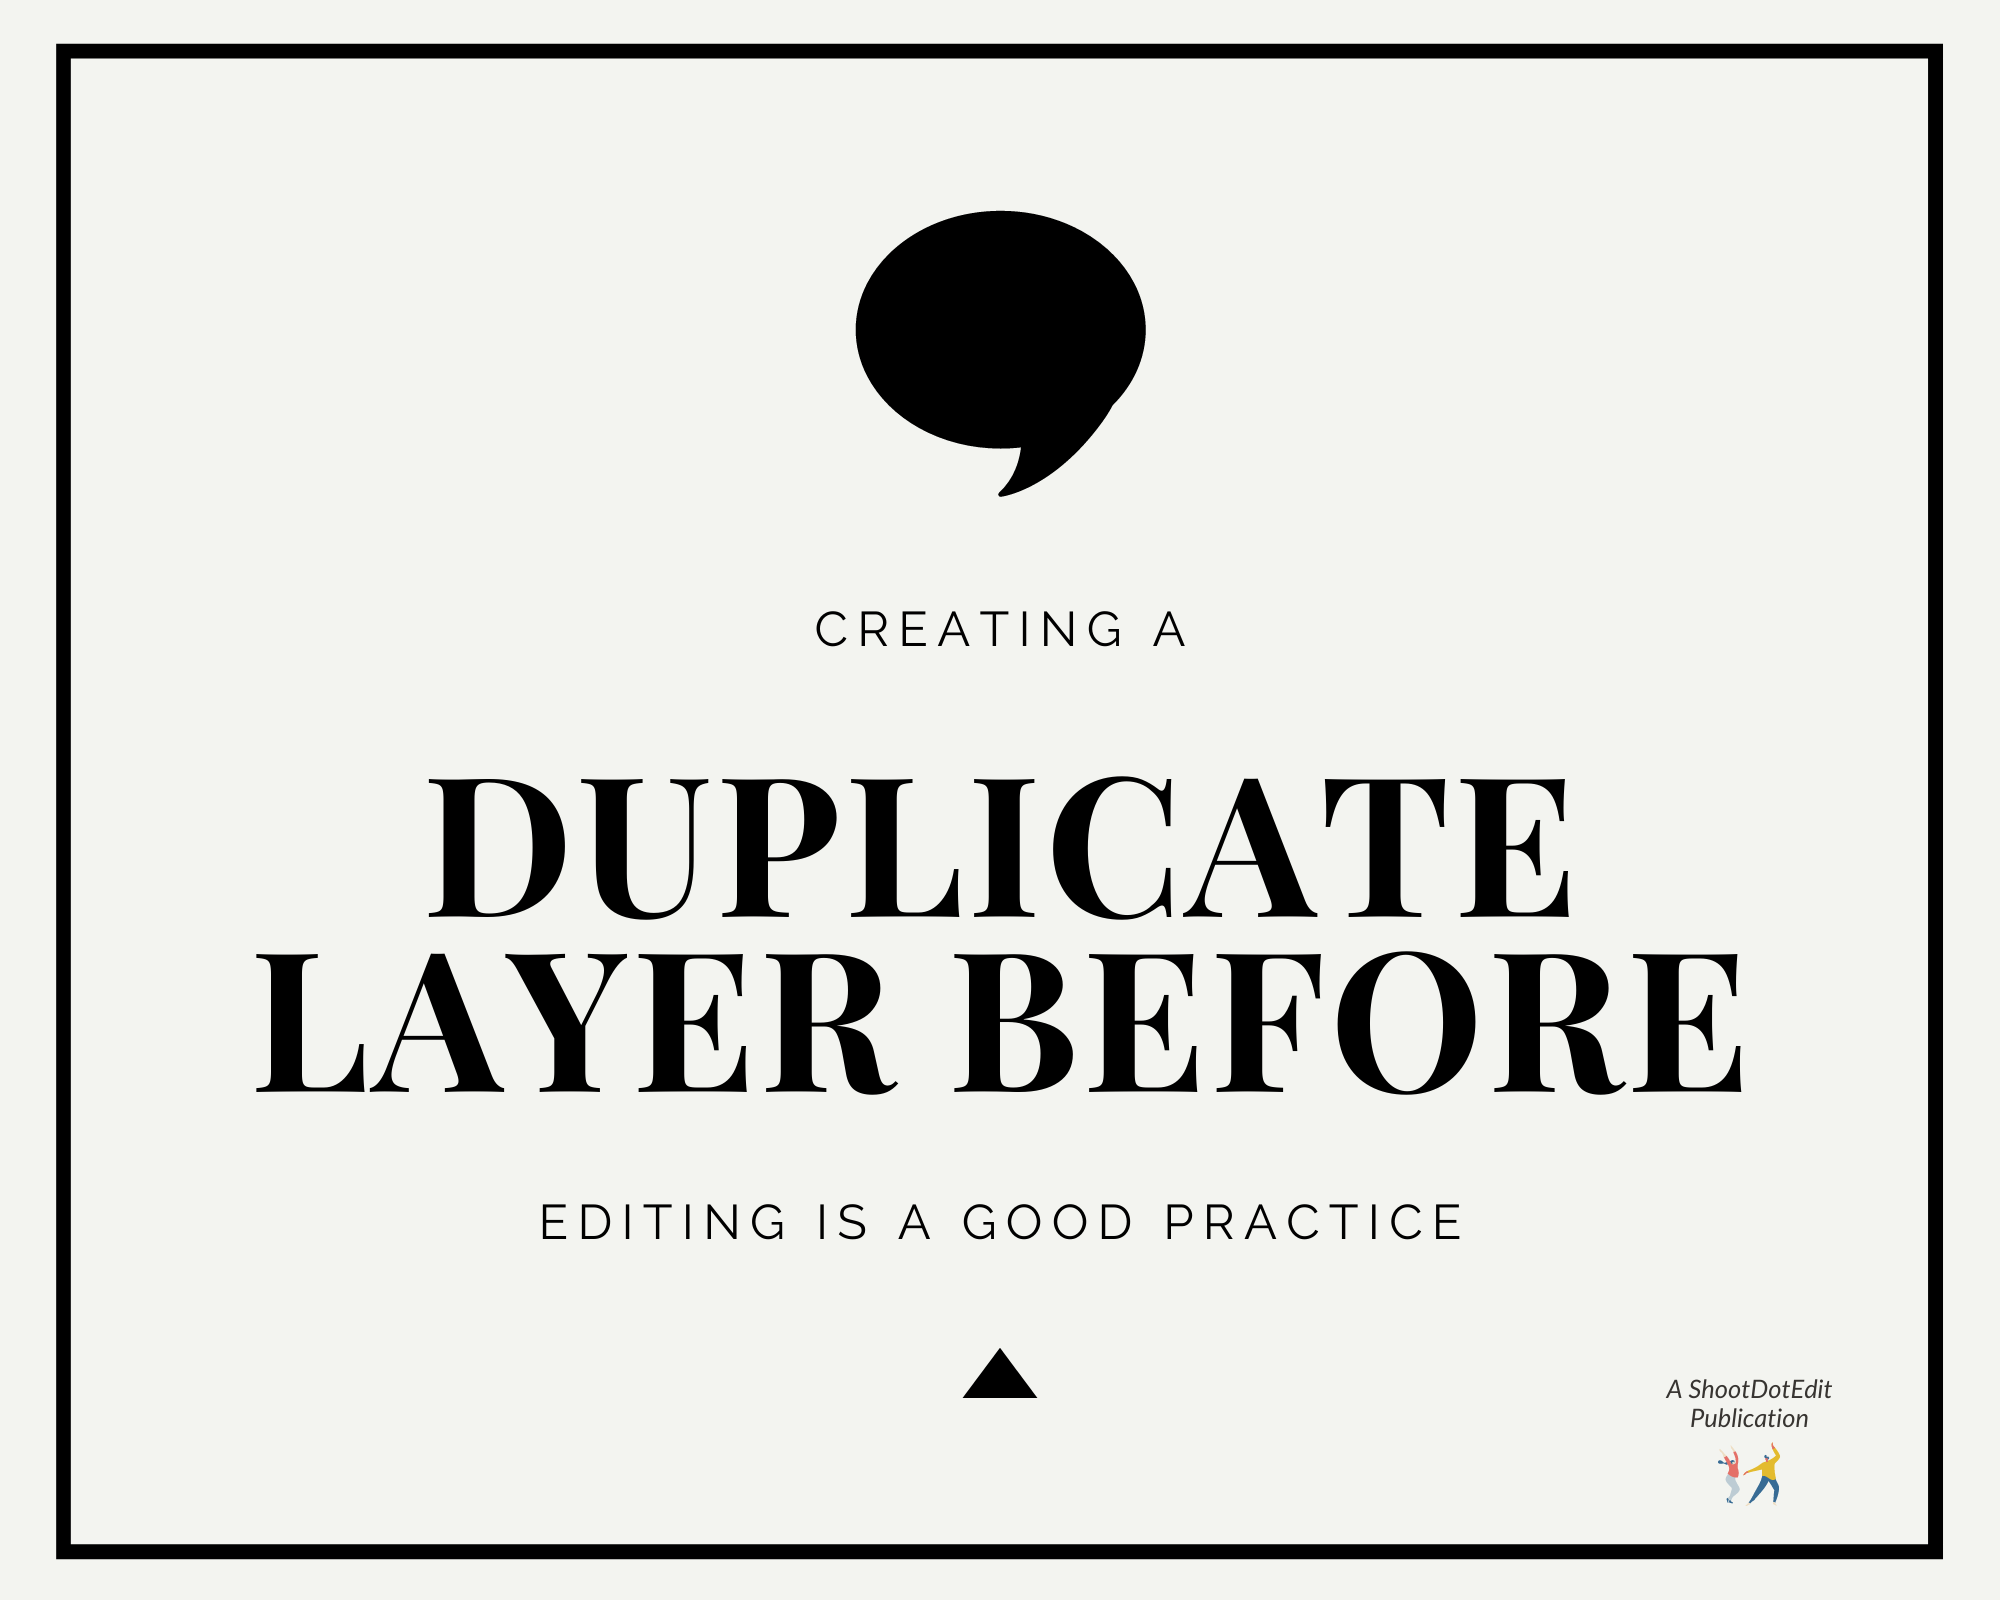 Infographic stating creating a duplicate layer before editing is a good practice